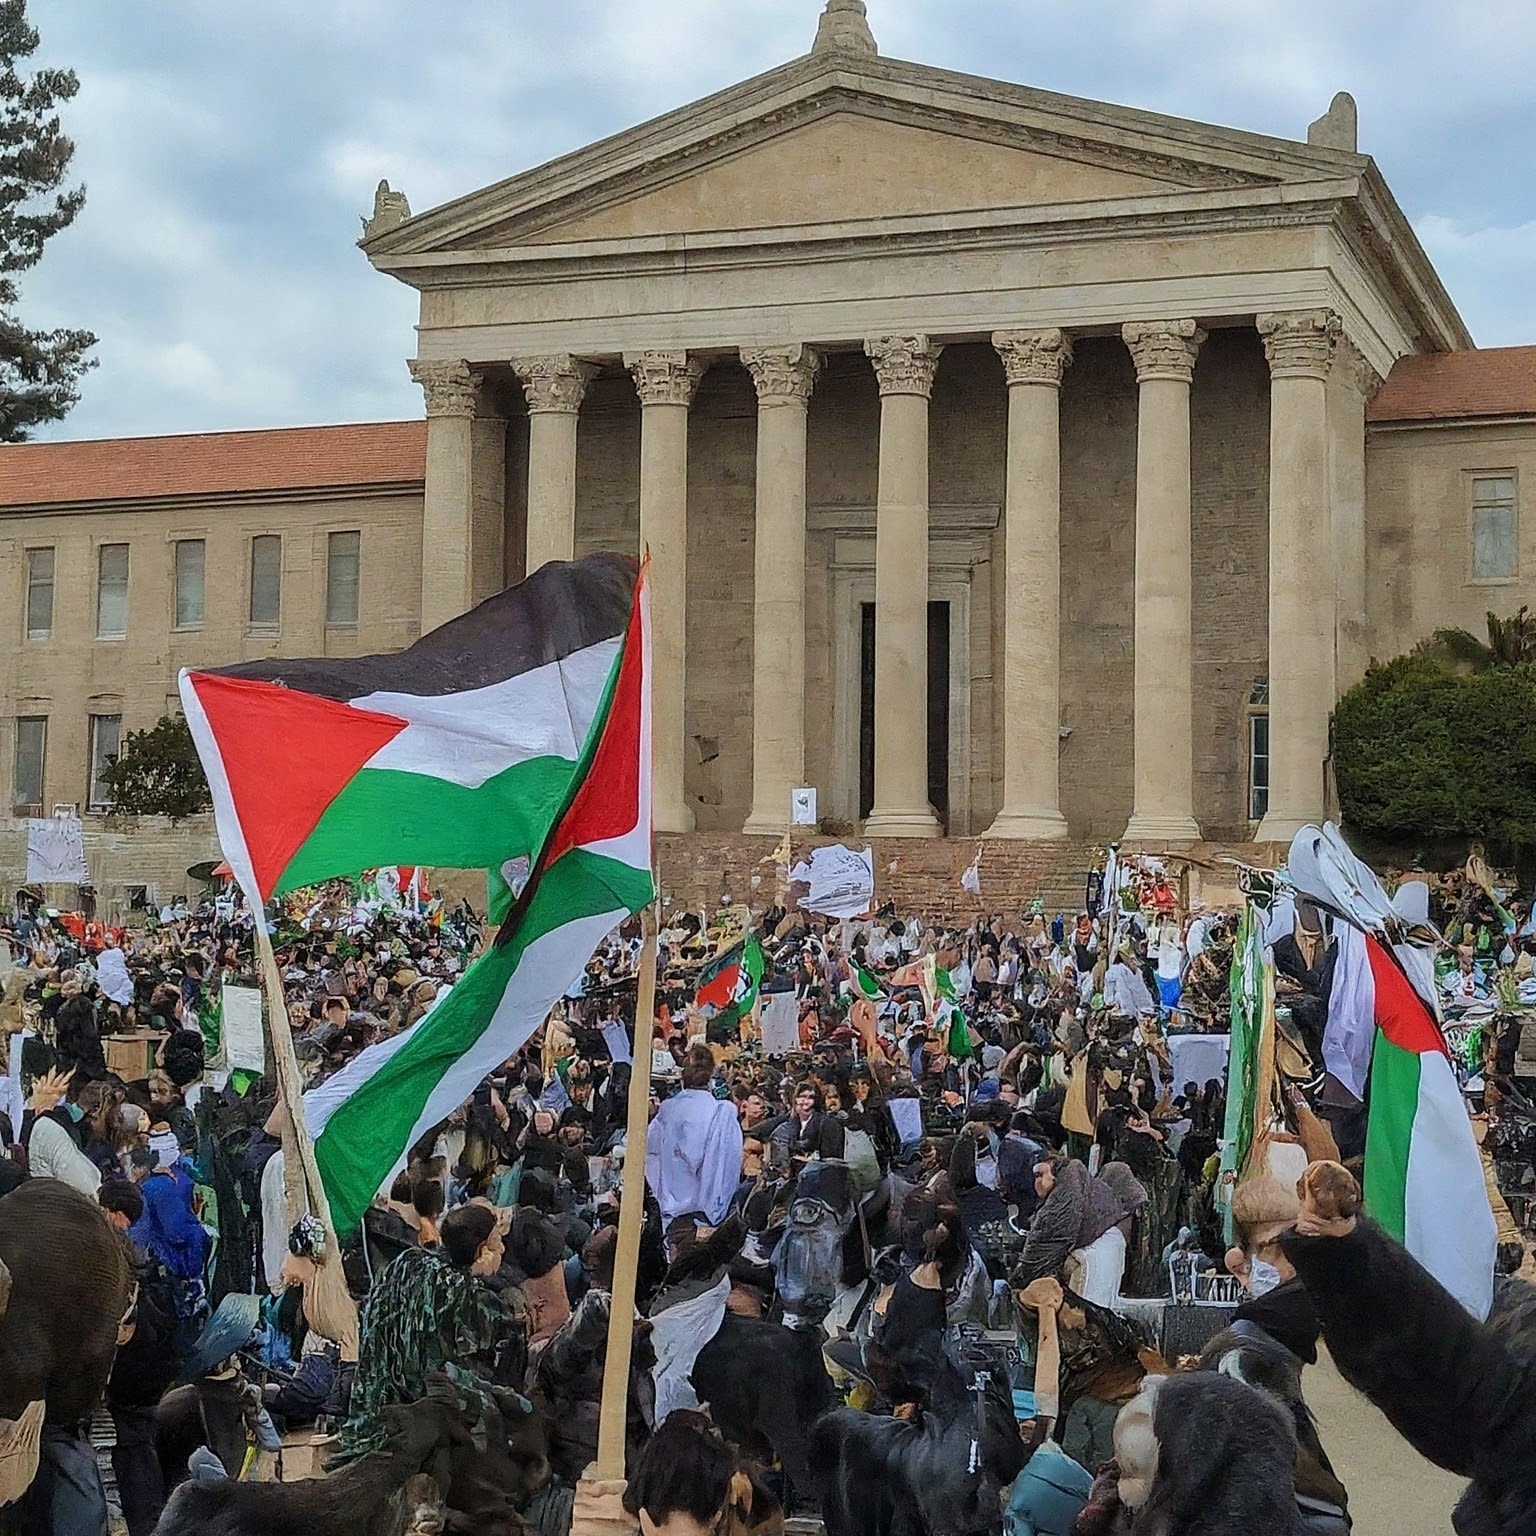 Another major university forced to move classes online as anti-Israel mobs disrupt campus